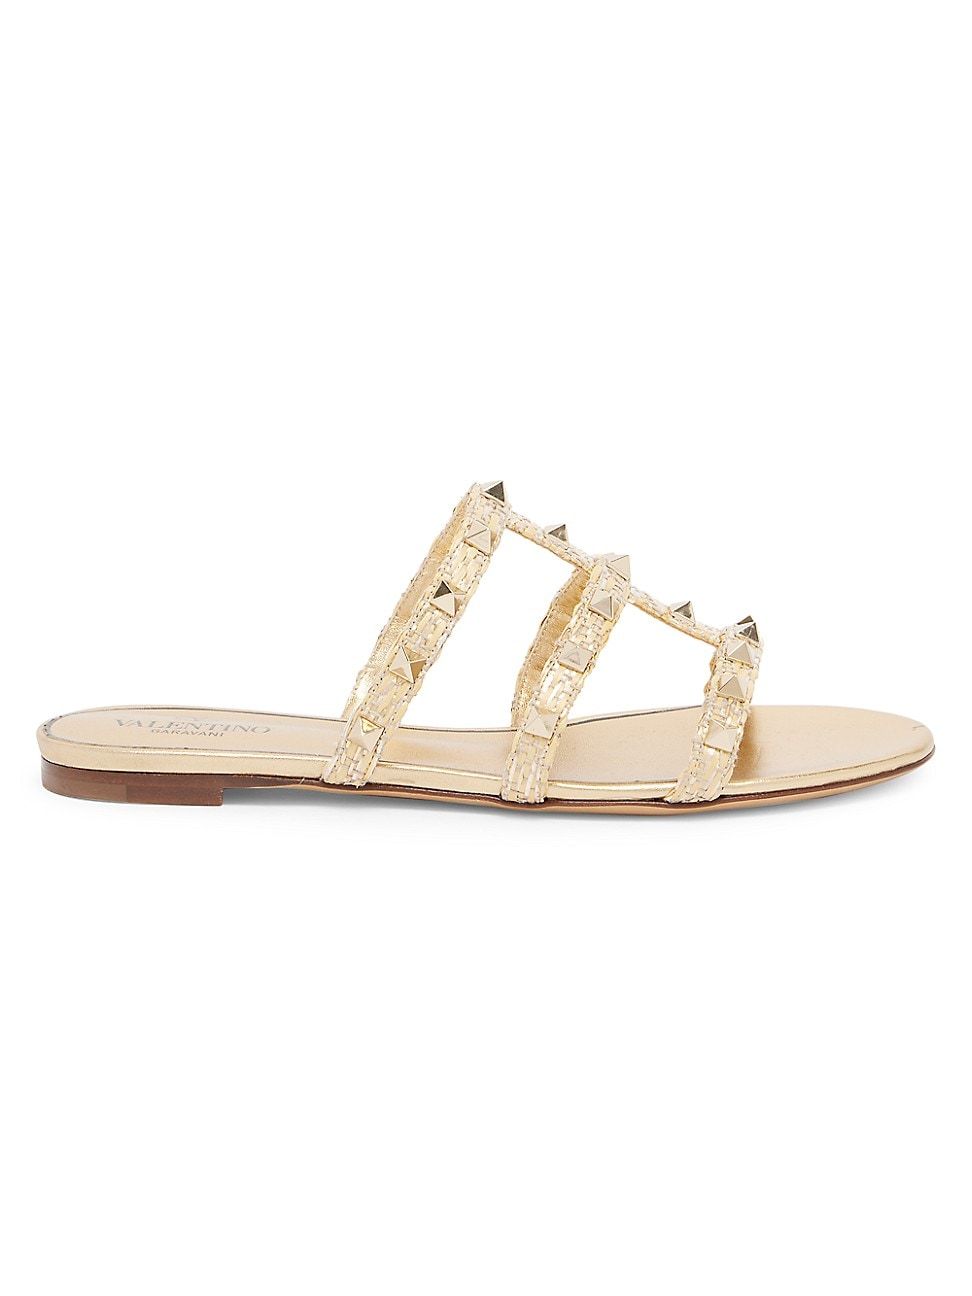 Women's Rockstud Leather Caged Sandals - Naturale Gold - Size 7 - Naturale Gold - Size 7 | Saks Fifth Avenue